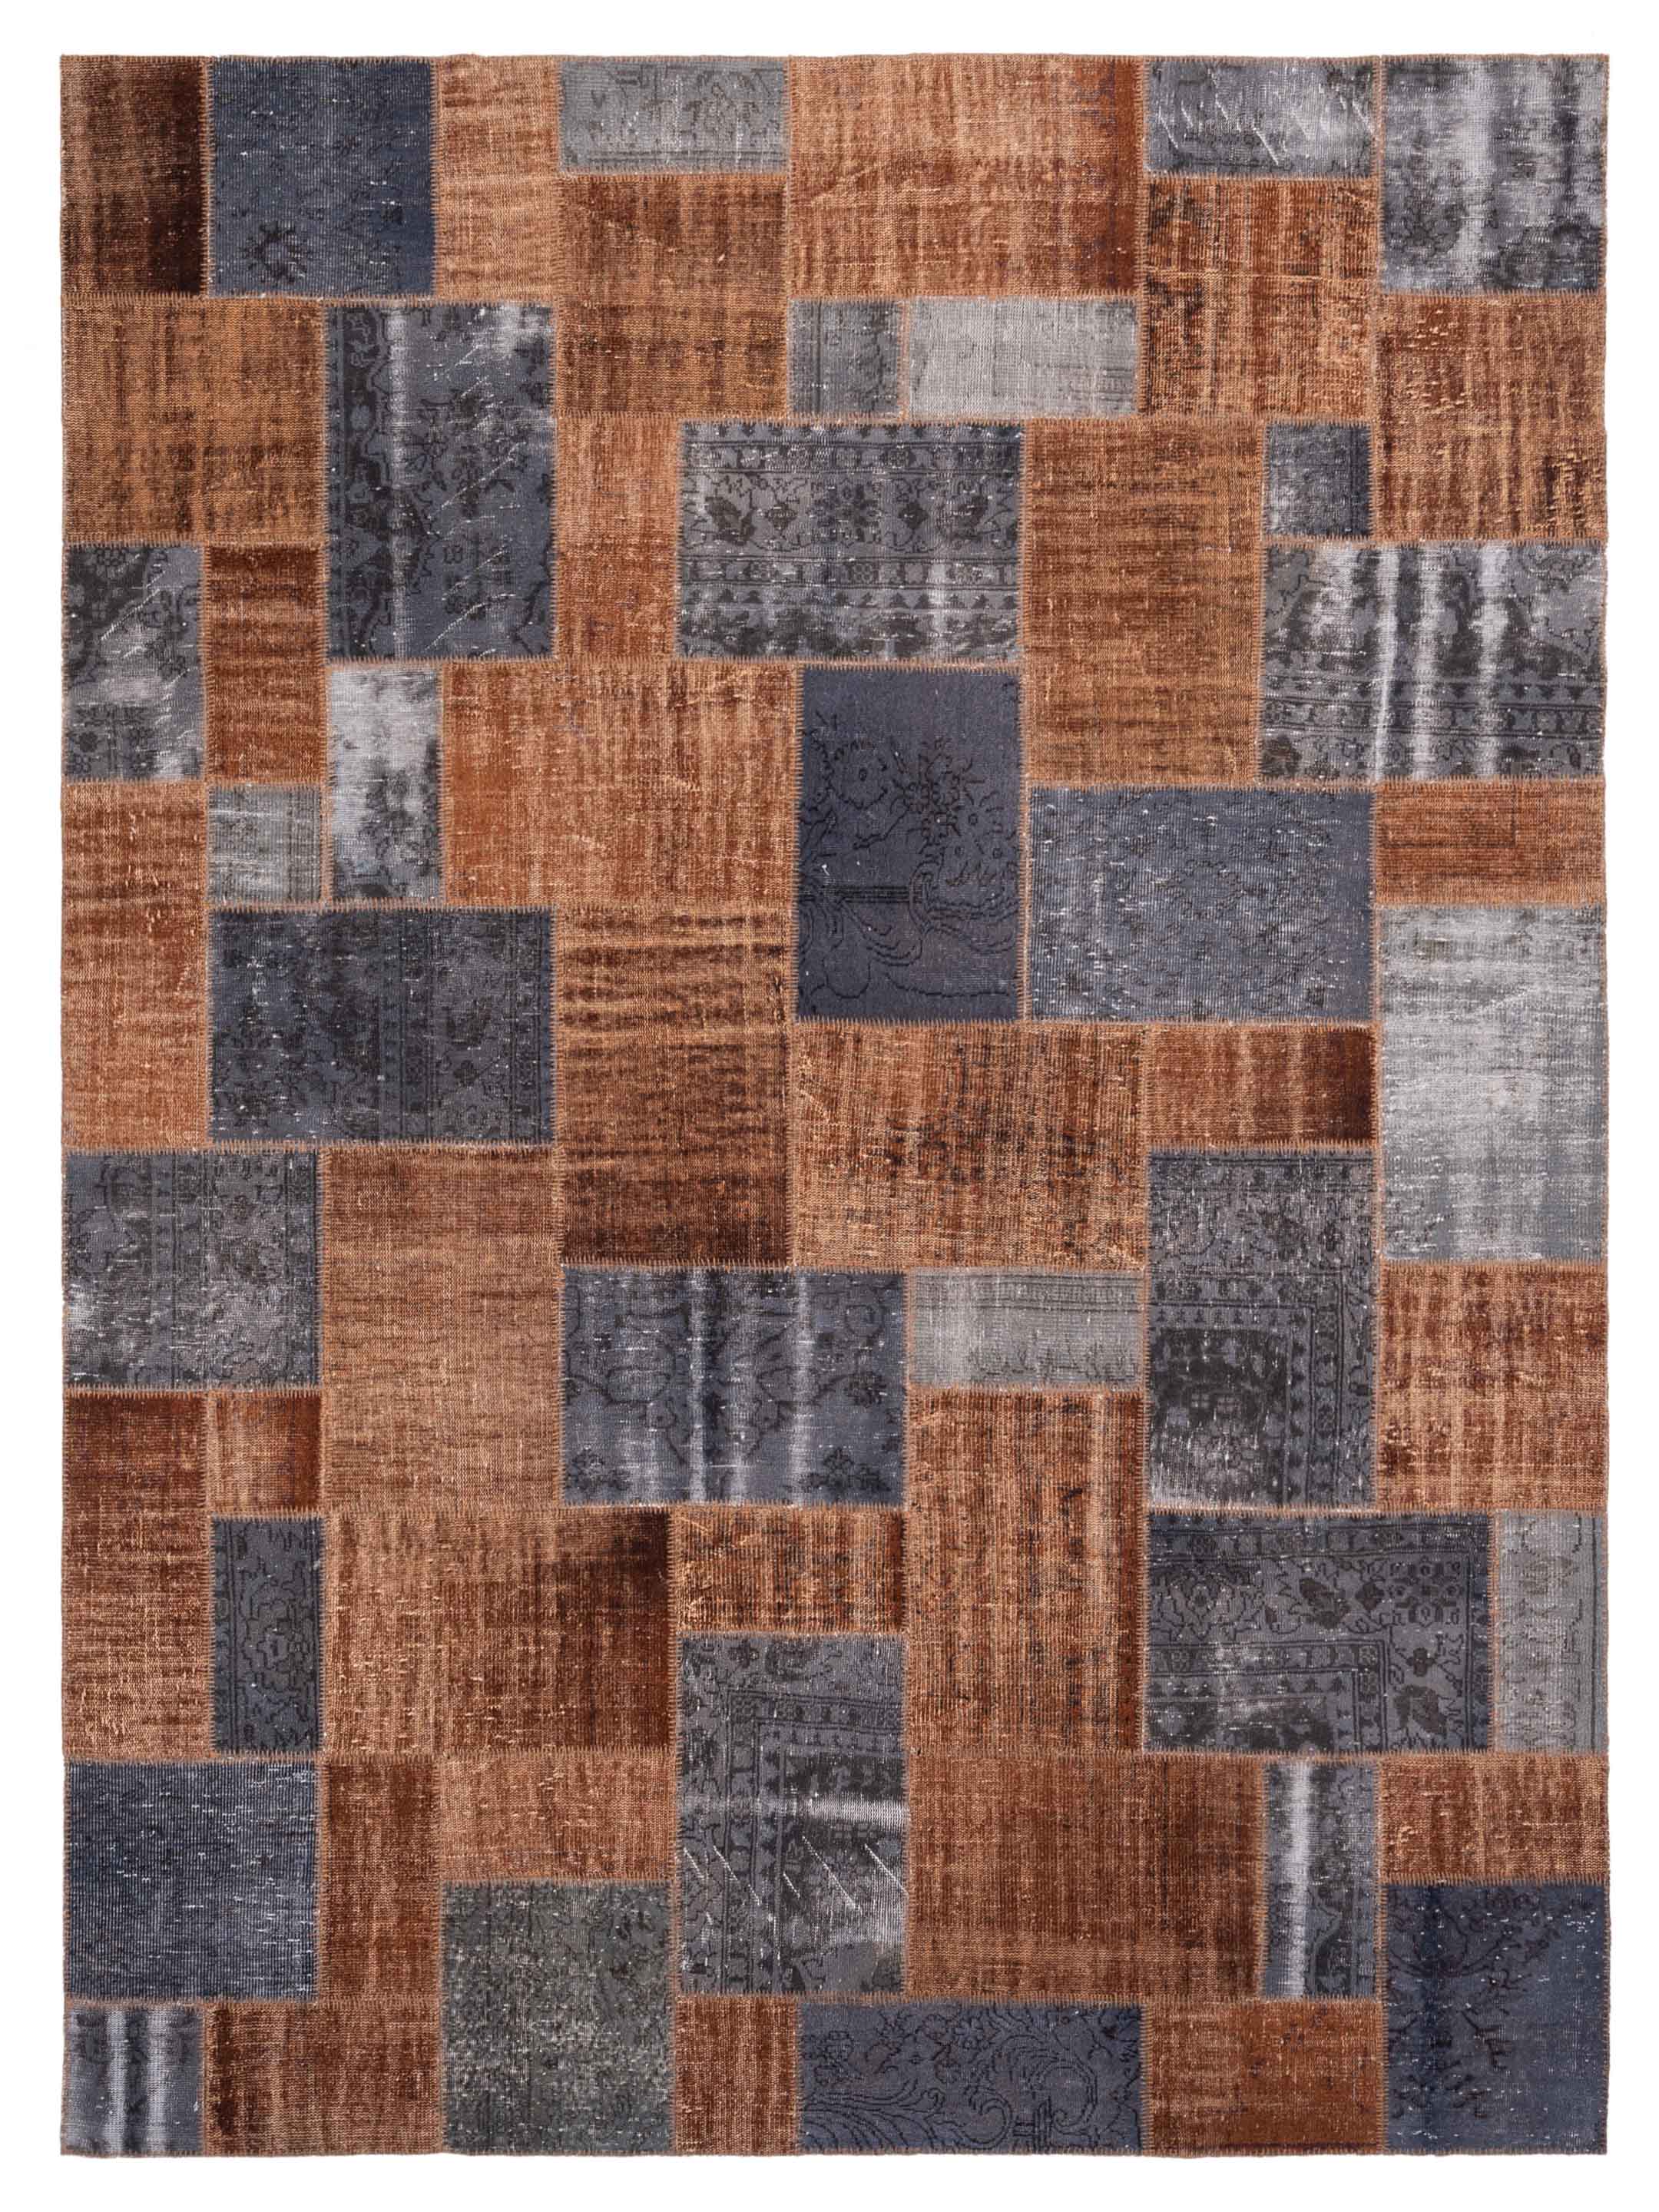 Brown Gray patchwork hand-knotted Turkish area rug	